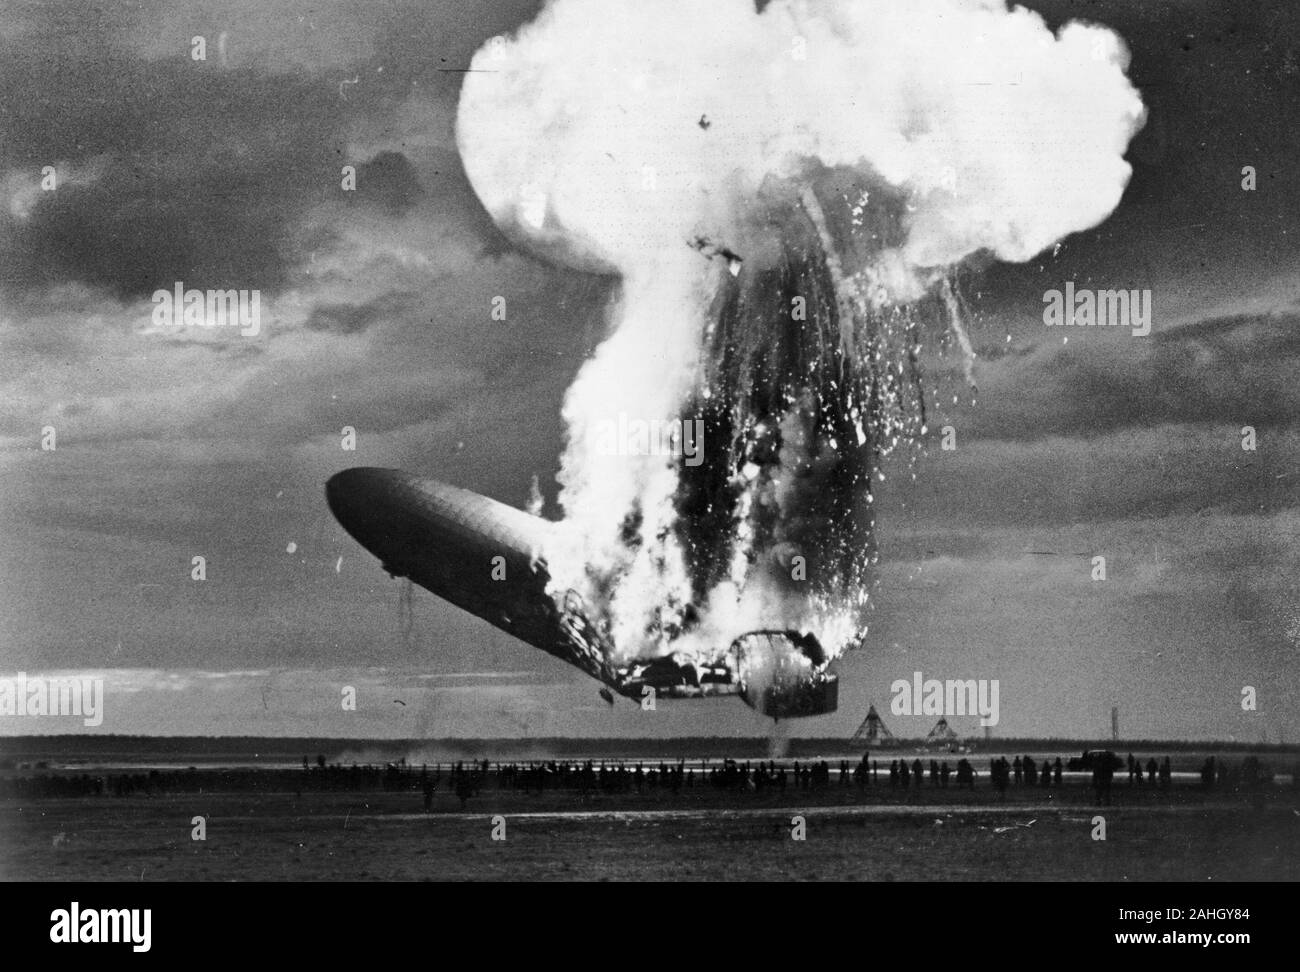 Left side view of German airship Zeppelin LZ 129 Hindenburg burning at Lakehurst, New Jersey, 6 May 1937; the disaster occured while the airship was landing. In this photo, the rear half of the ship is on fire but the ship is still above the ground; nose is pitched sharply upwards. Stock Photo